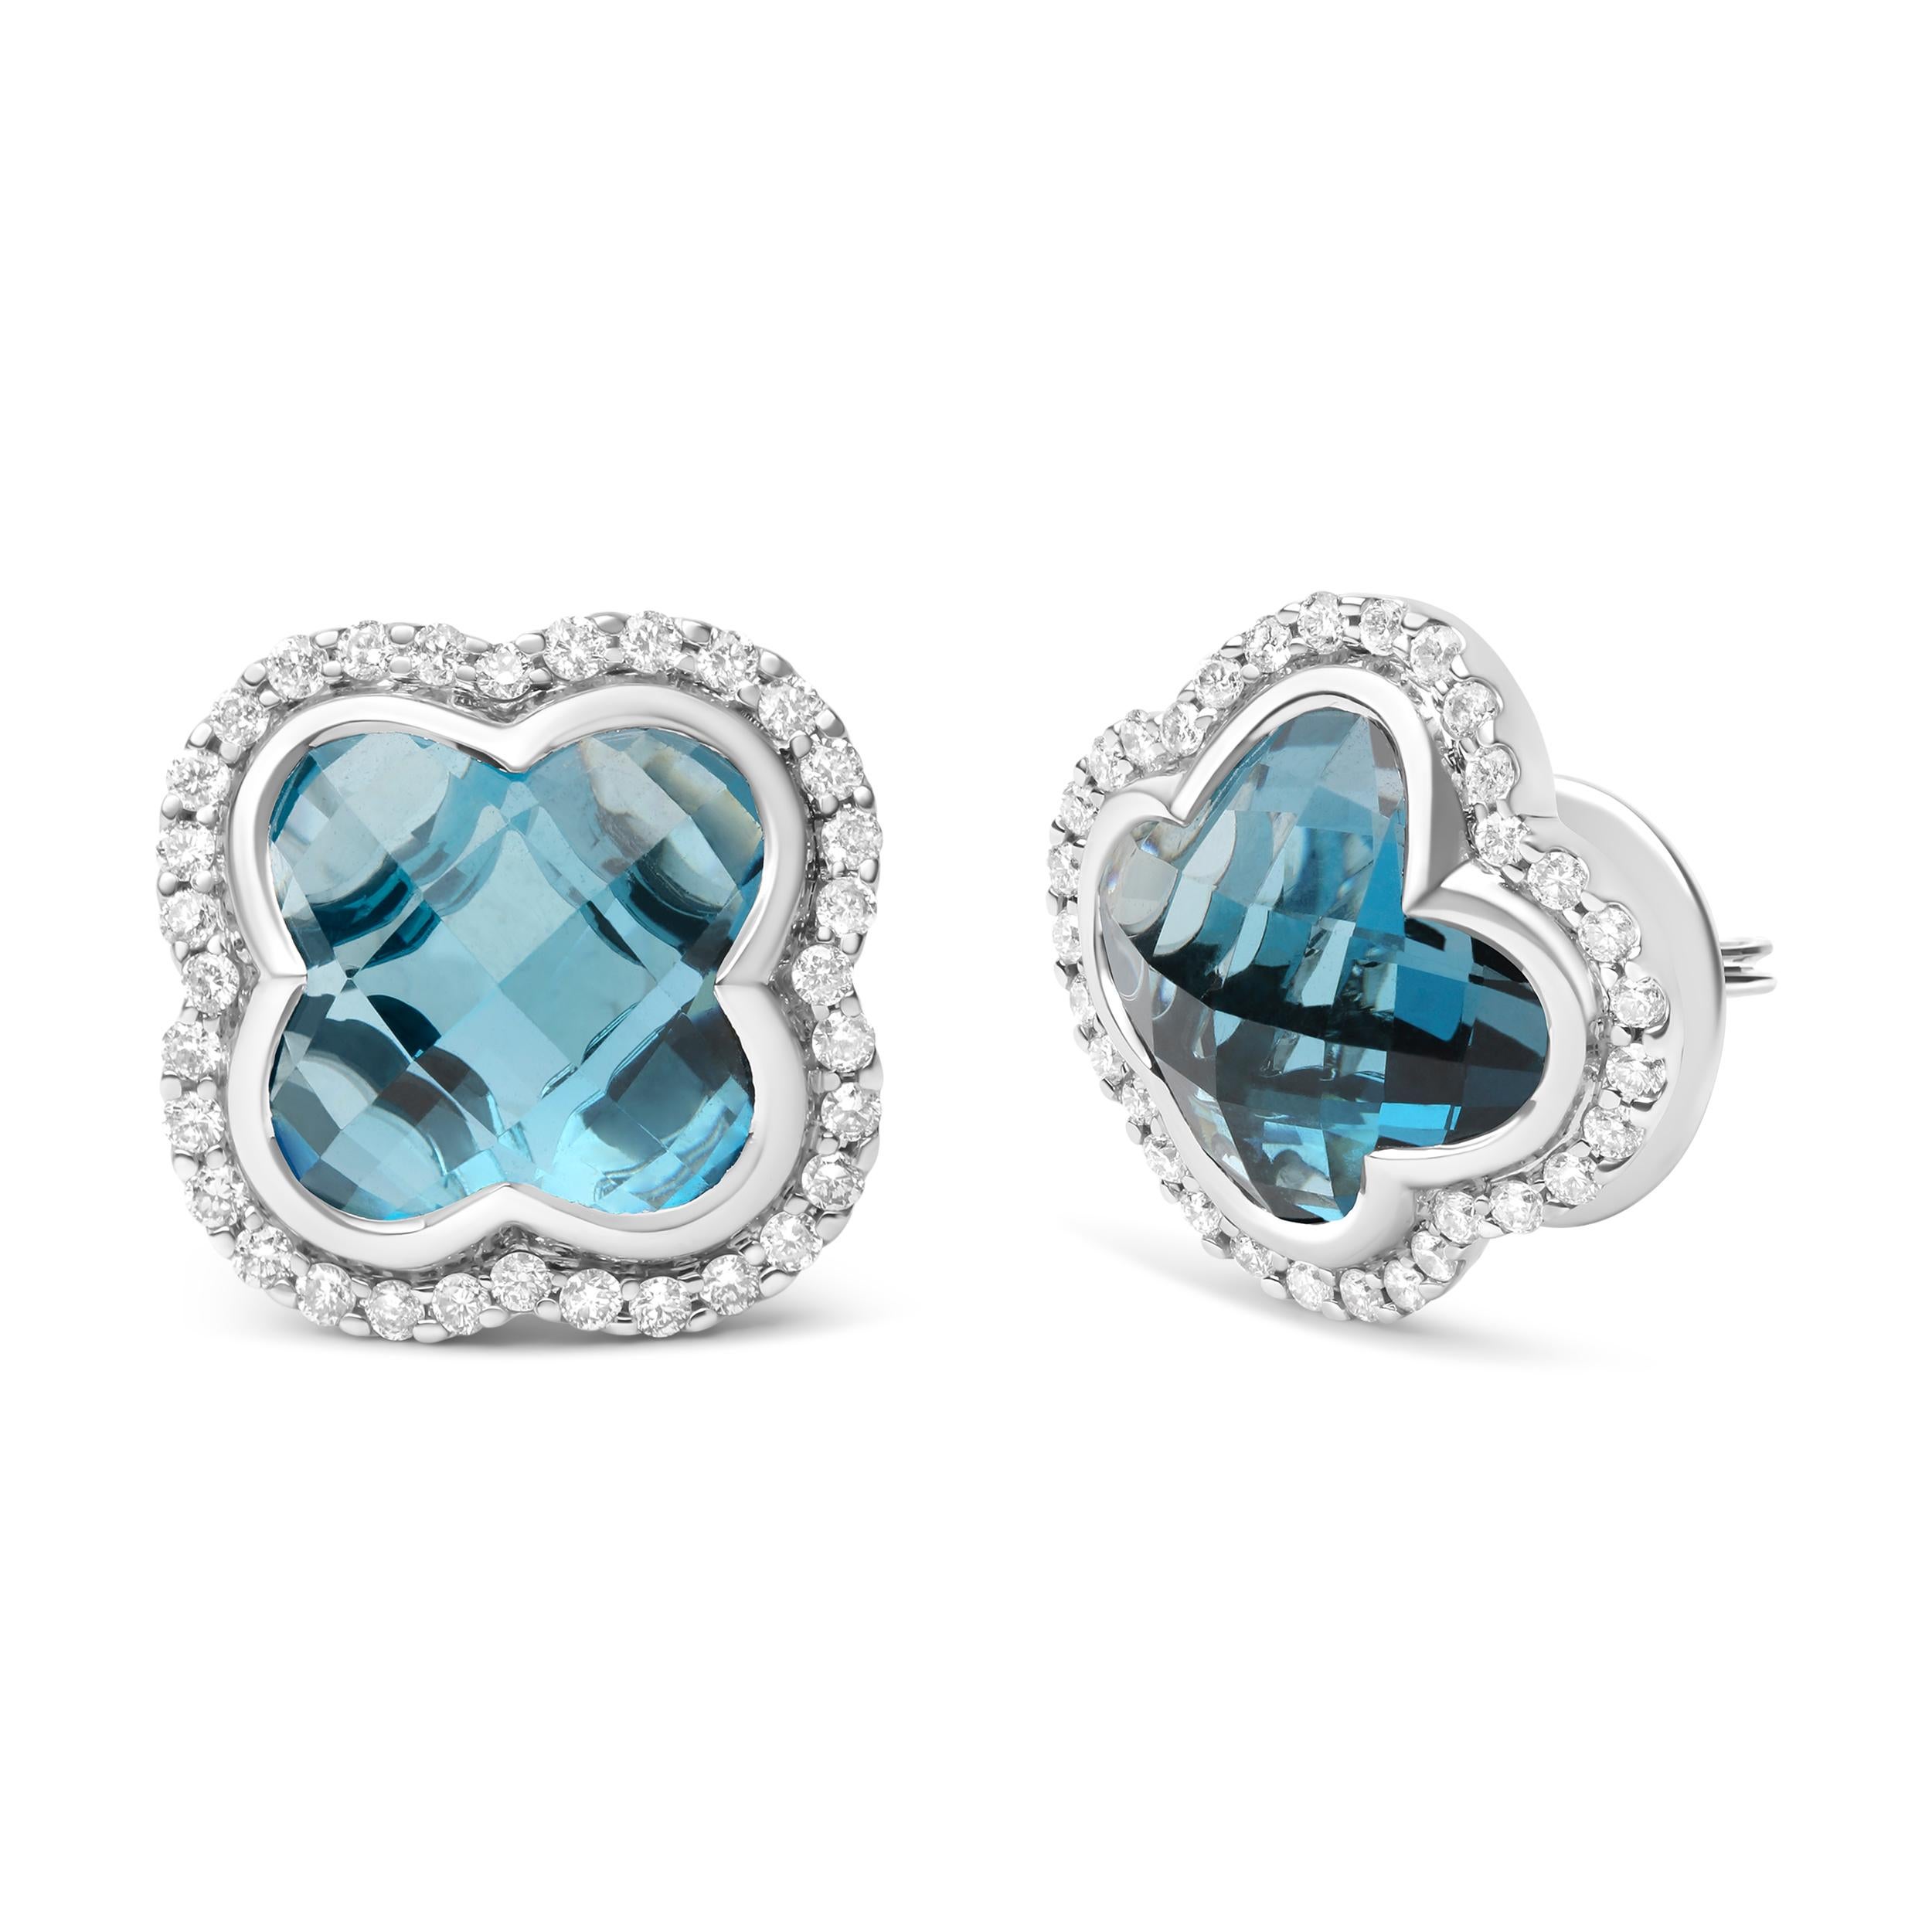 You will flip for these studs cast in genuine 18k white gold in a luck-bringing clover motif. The 11x11mm clover-cut London blue topaz gemstones in a stone-enhancing invisible setting. This natural gemstone is electrifying in a checkerboard cut that